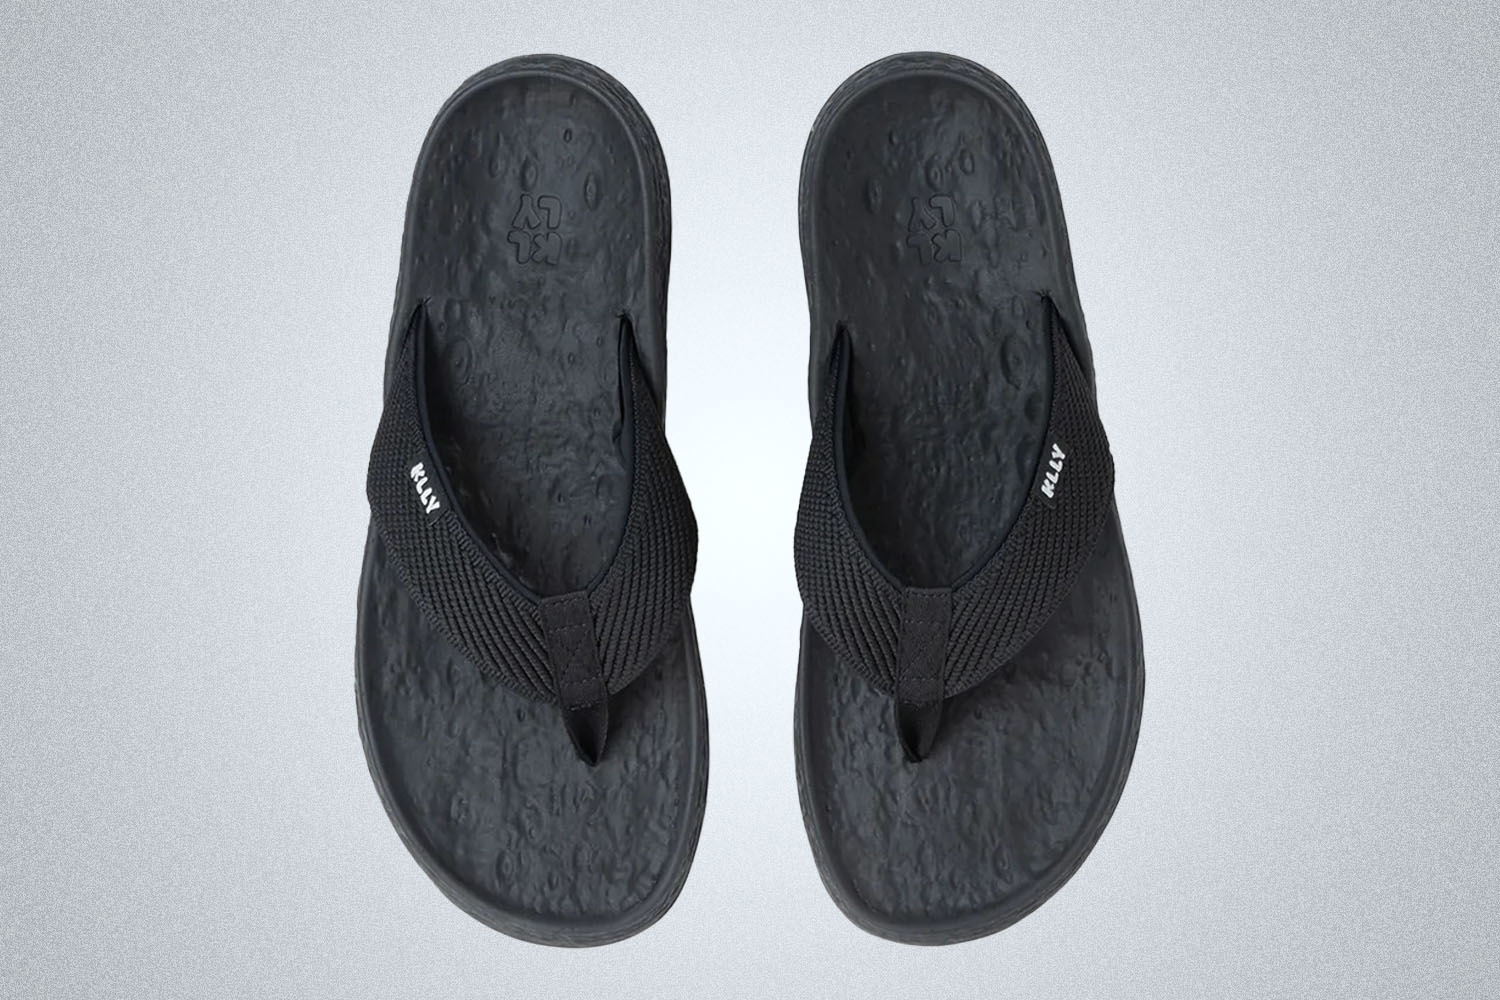 a pair of black Klly Sandals on a grey background